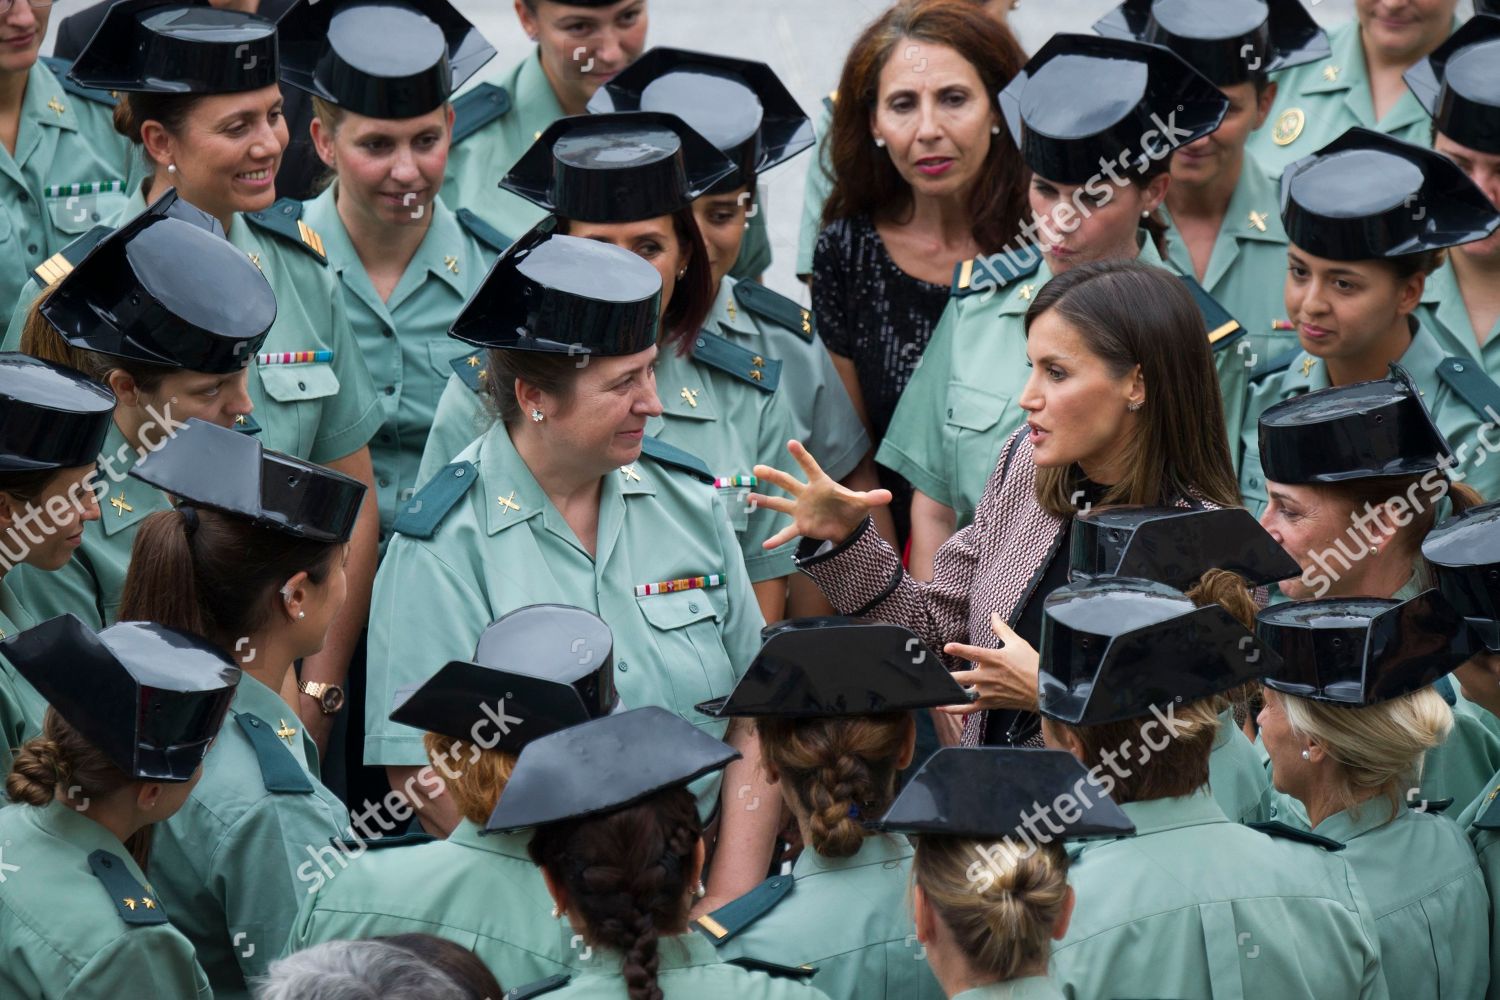 30th-anniversary-of-womens-admission-to-the-civil-guard-corps-madrid-spain-shutterstock-editorial-9896518ah.jpg